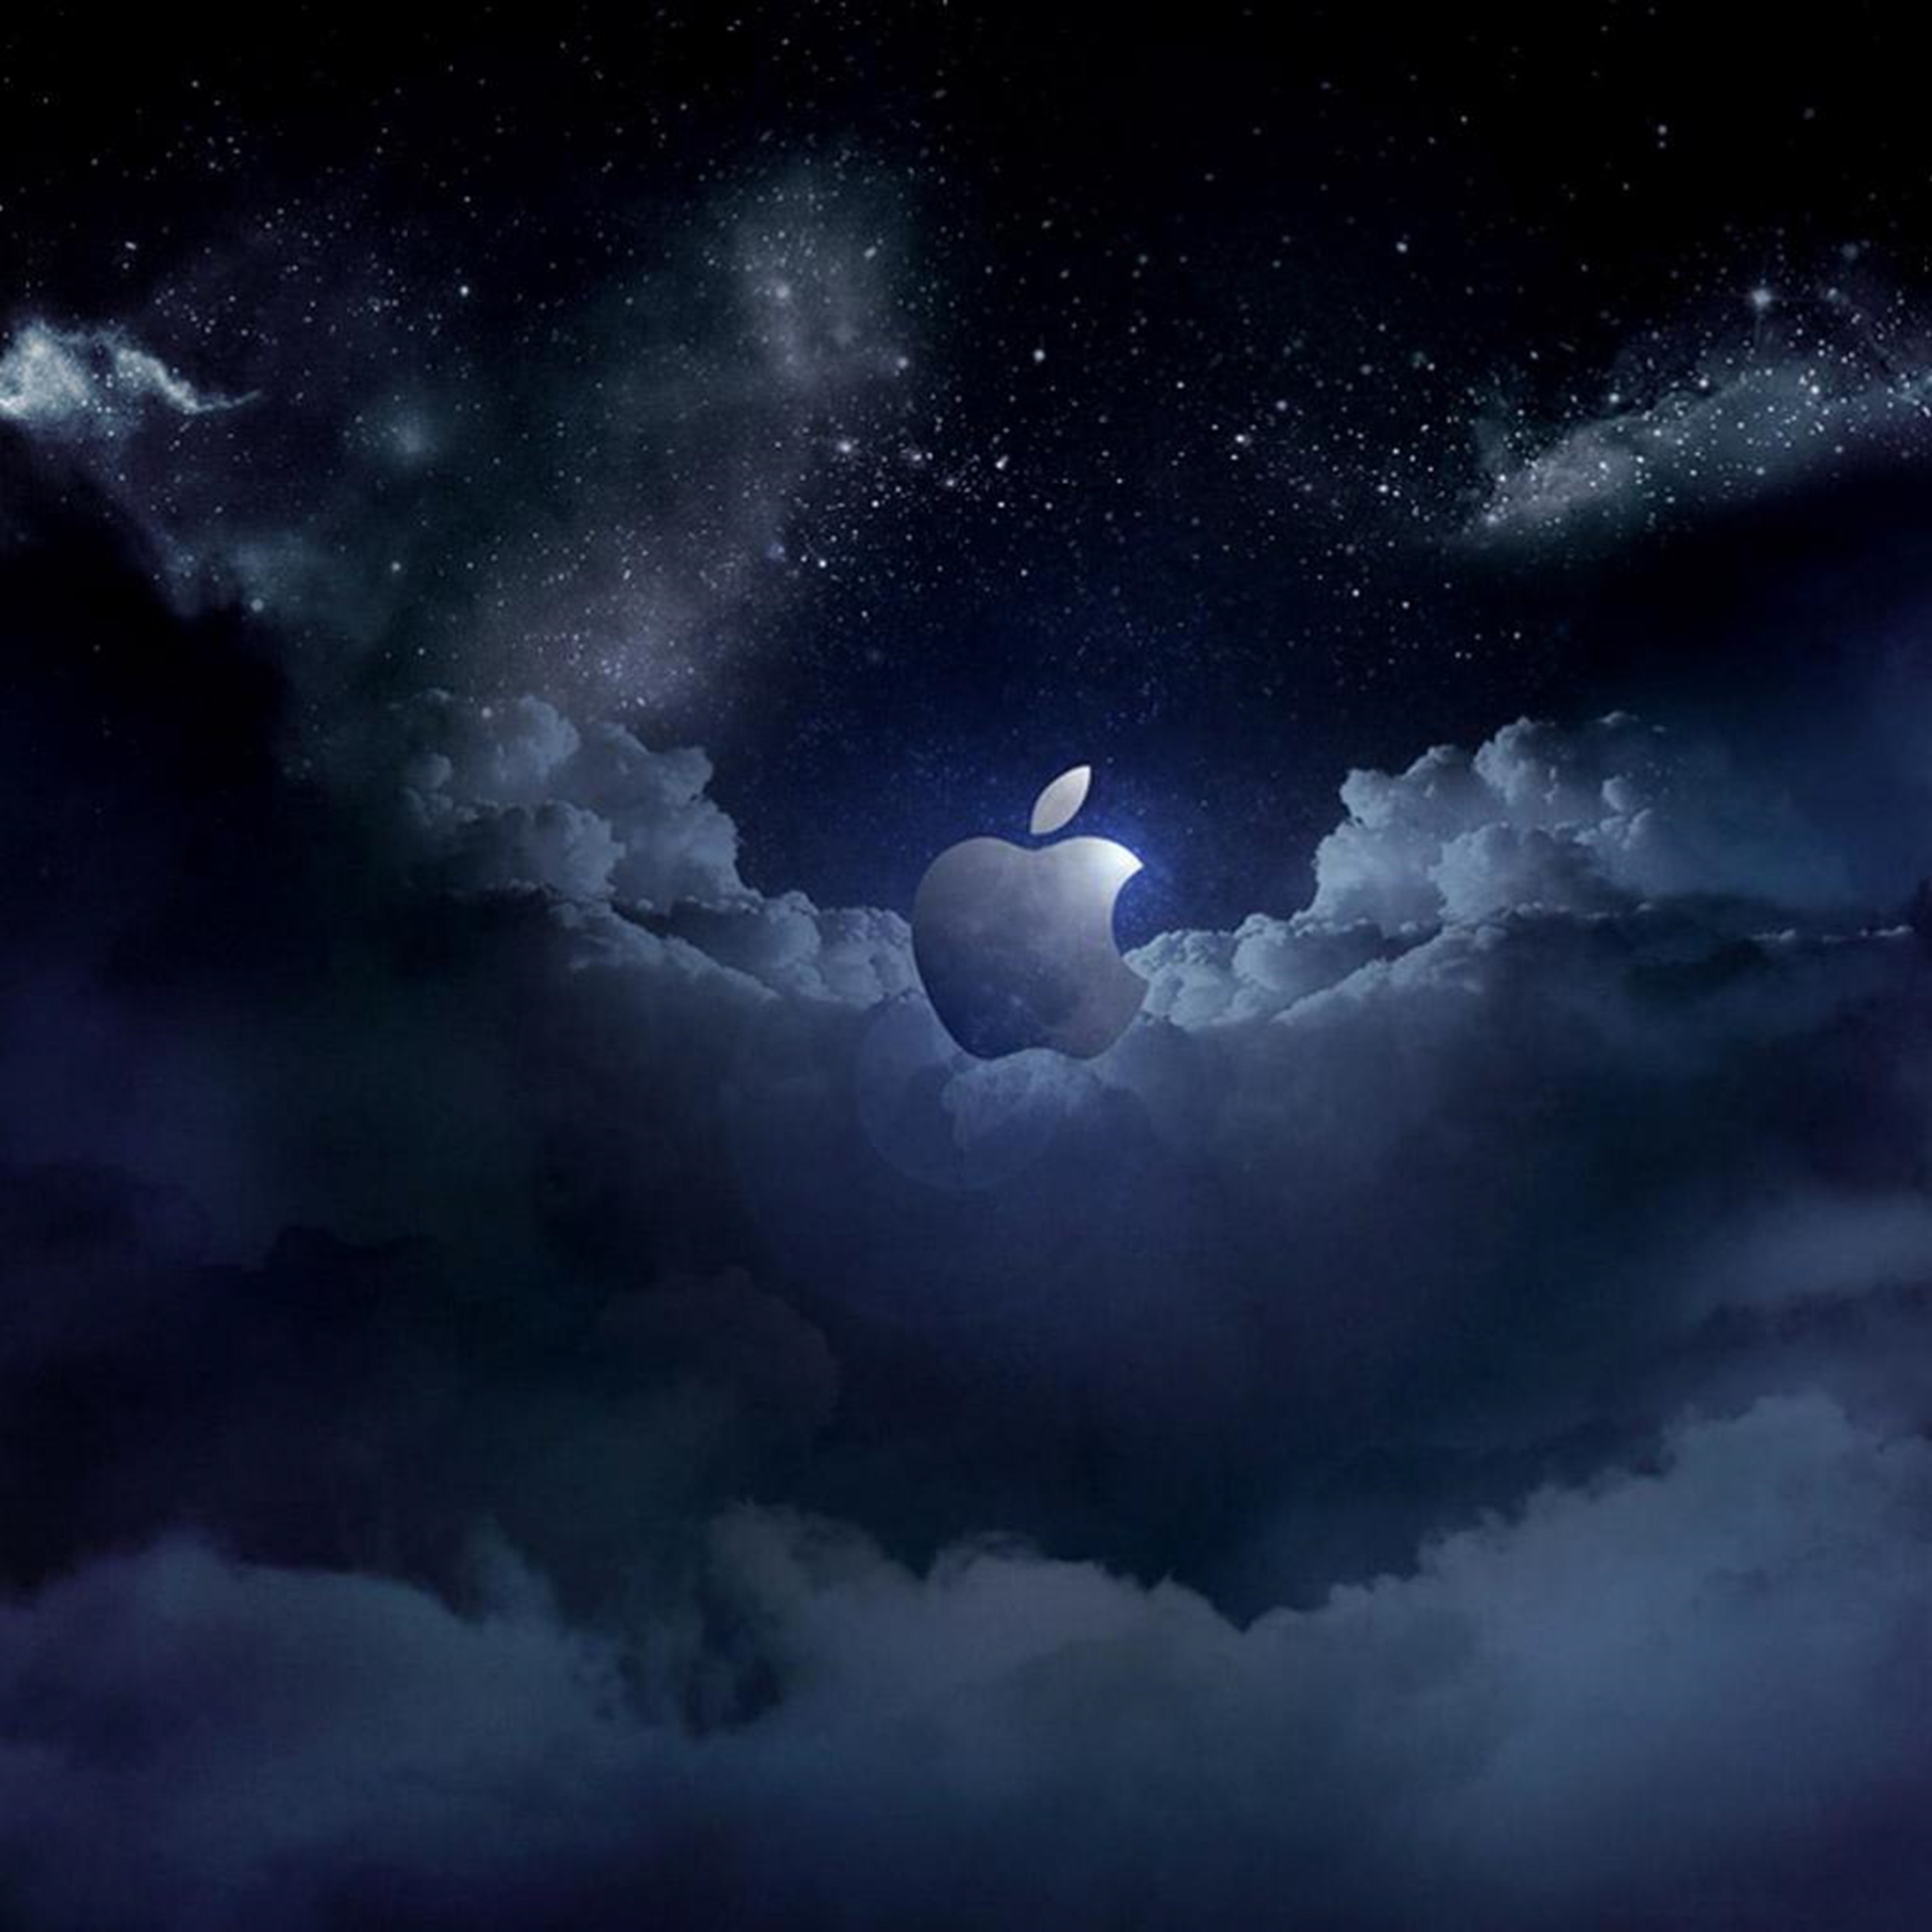 cool apple wallpapers hd